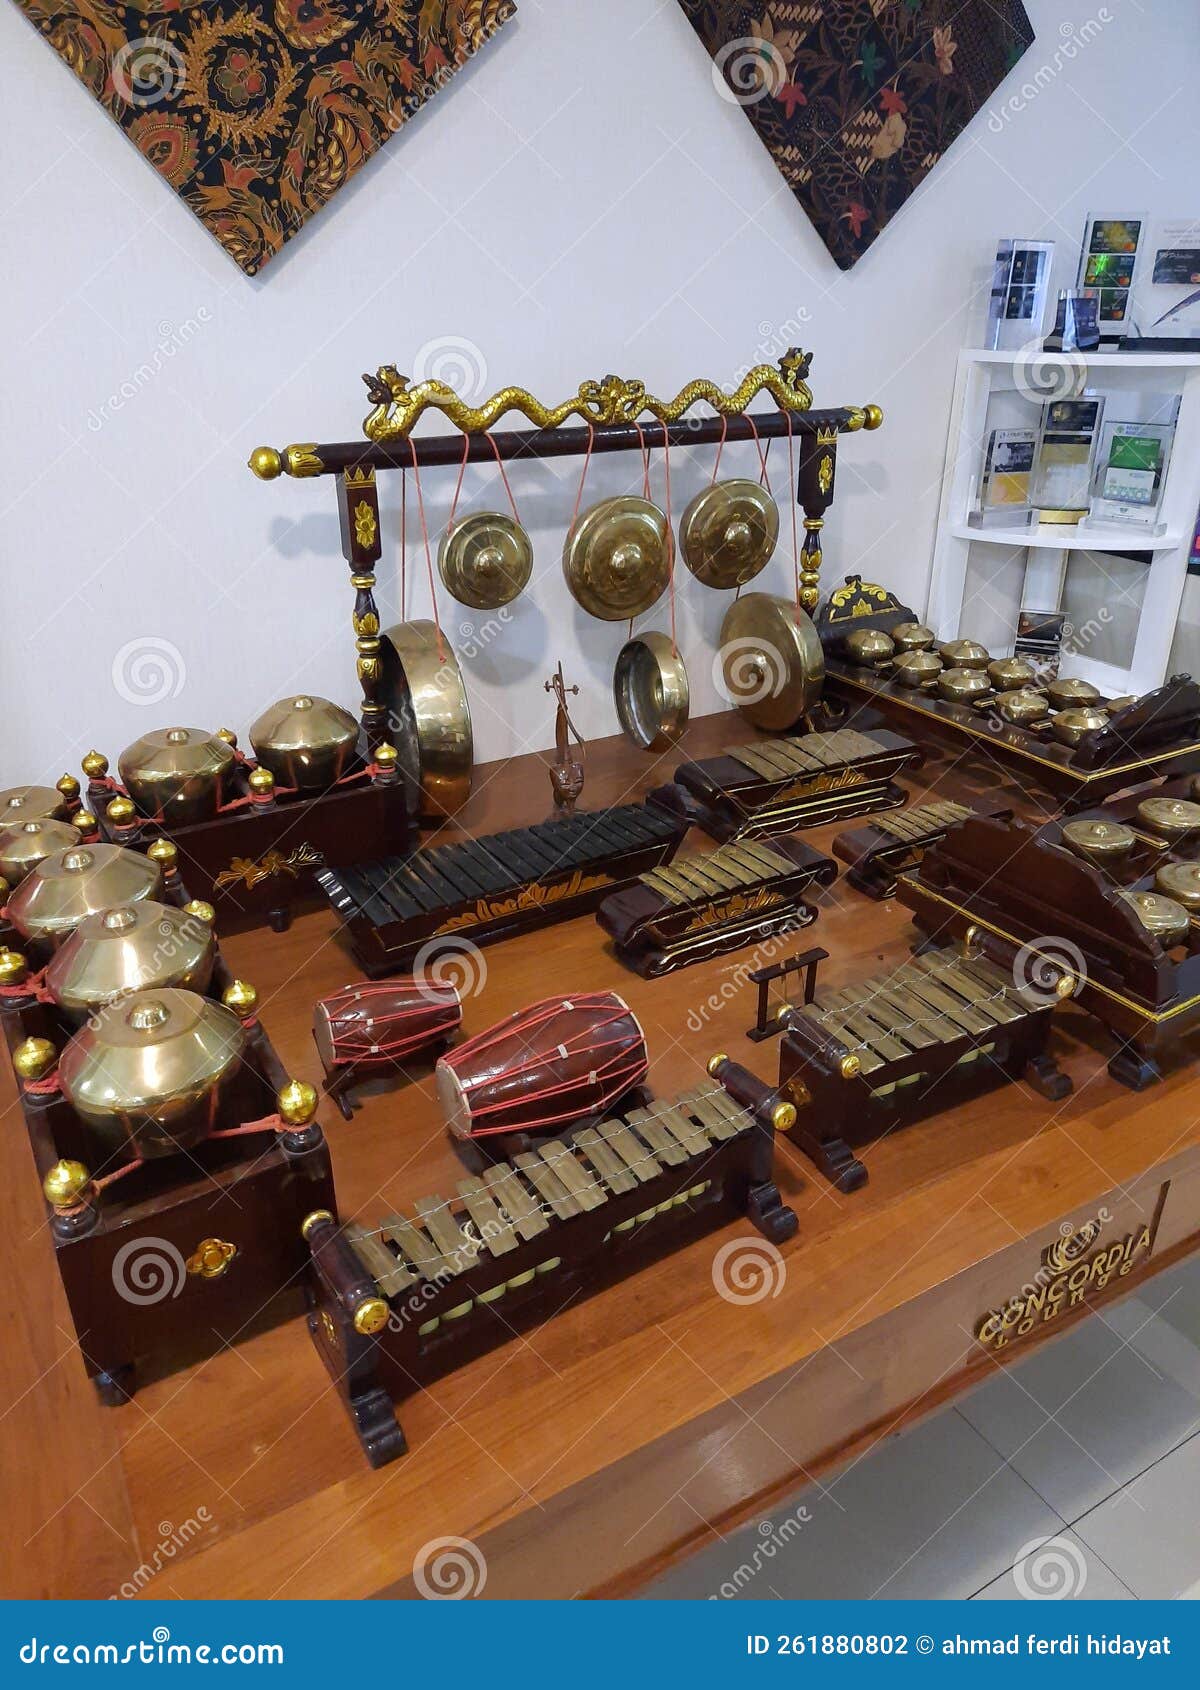 List 100+ Images the gamelan is a traditional orchestra from china. Excellent